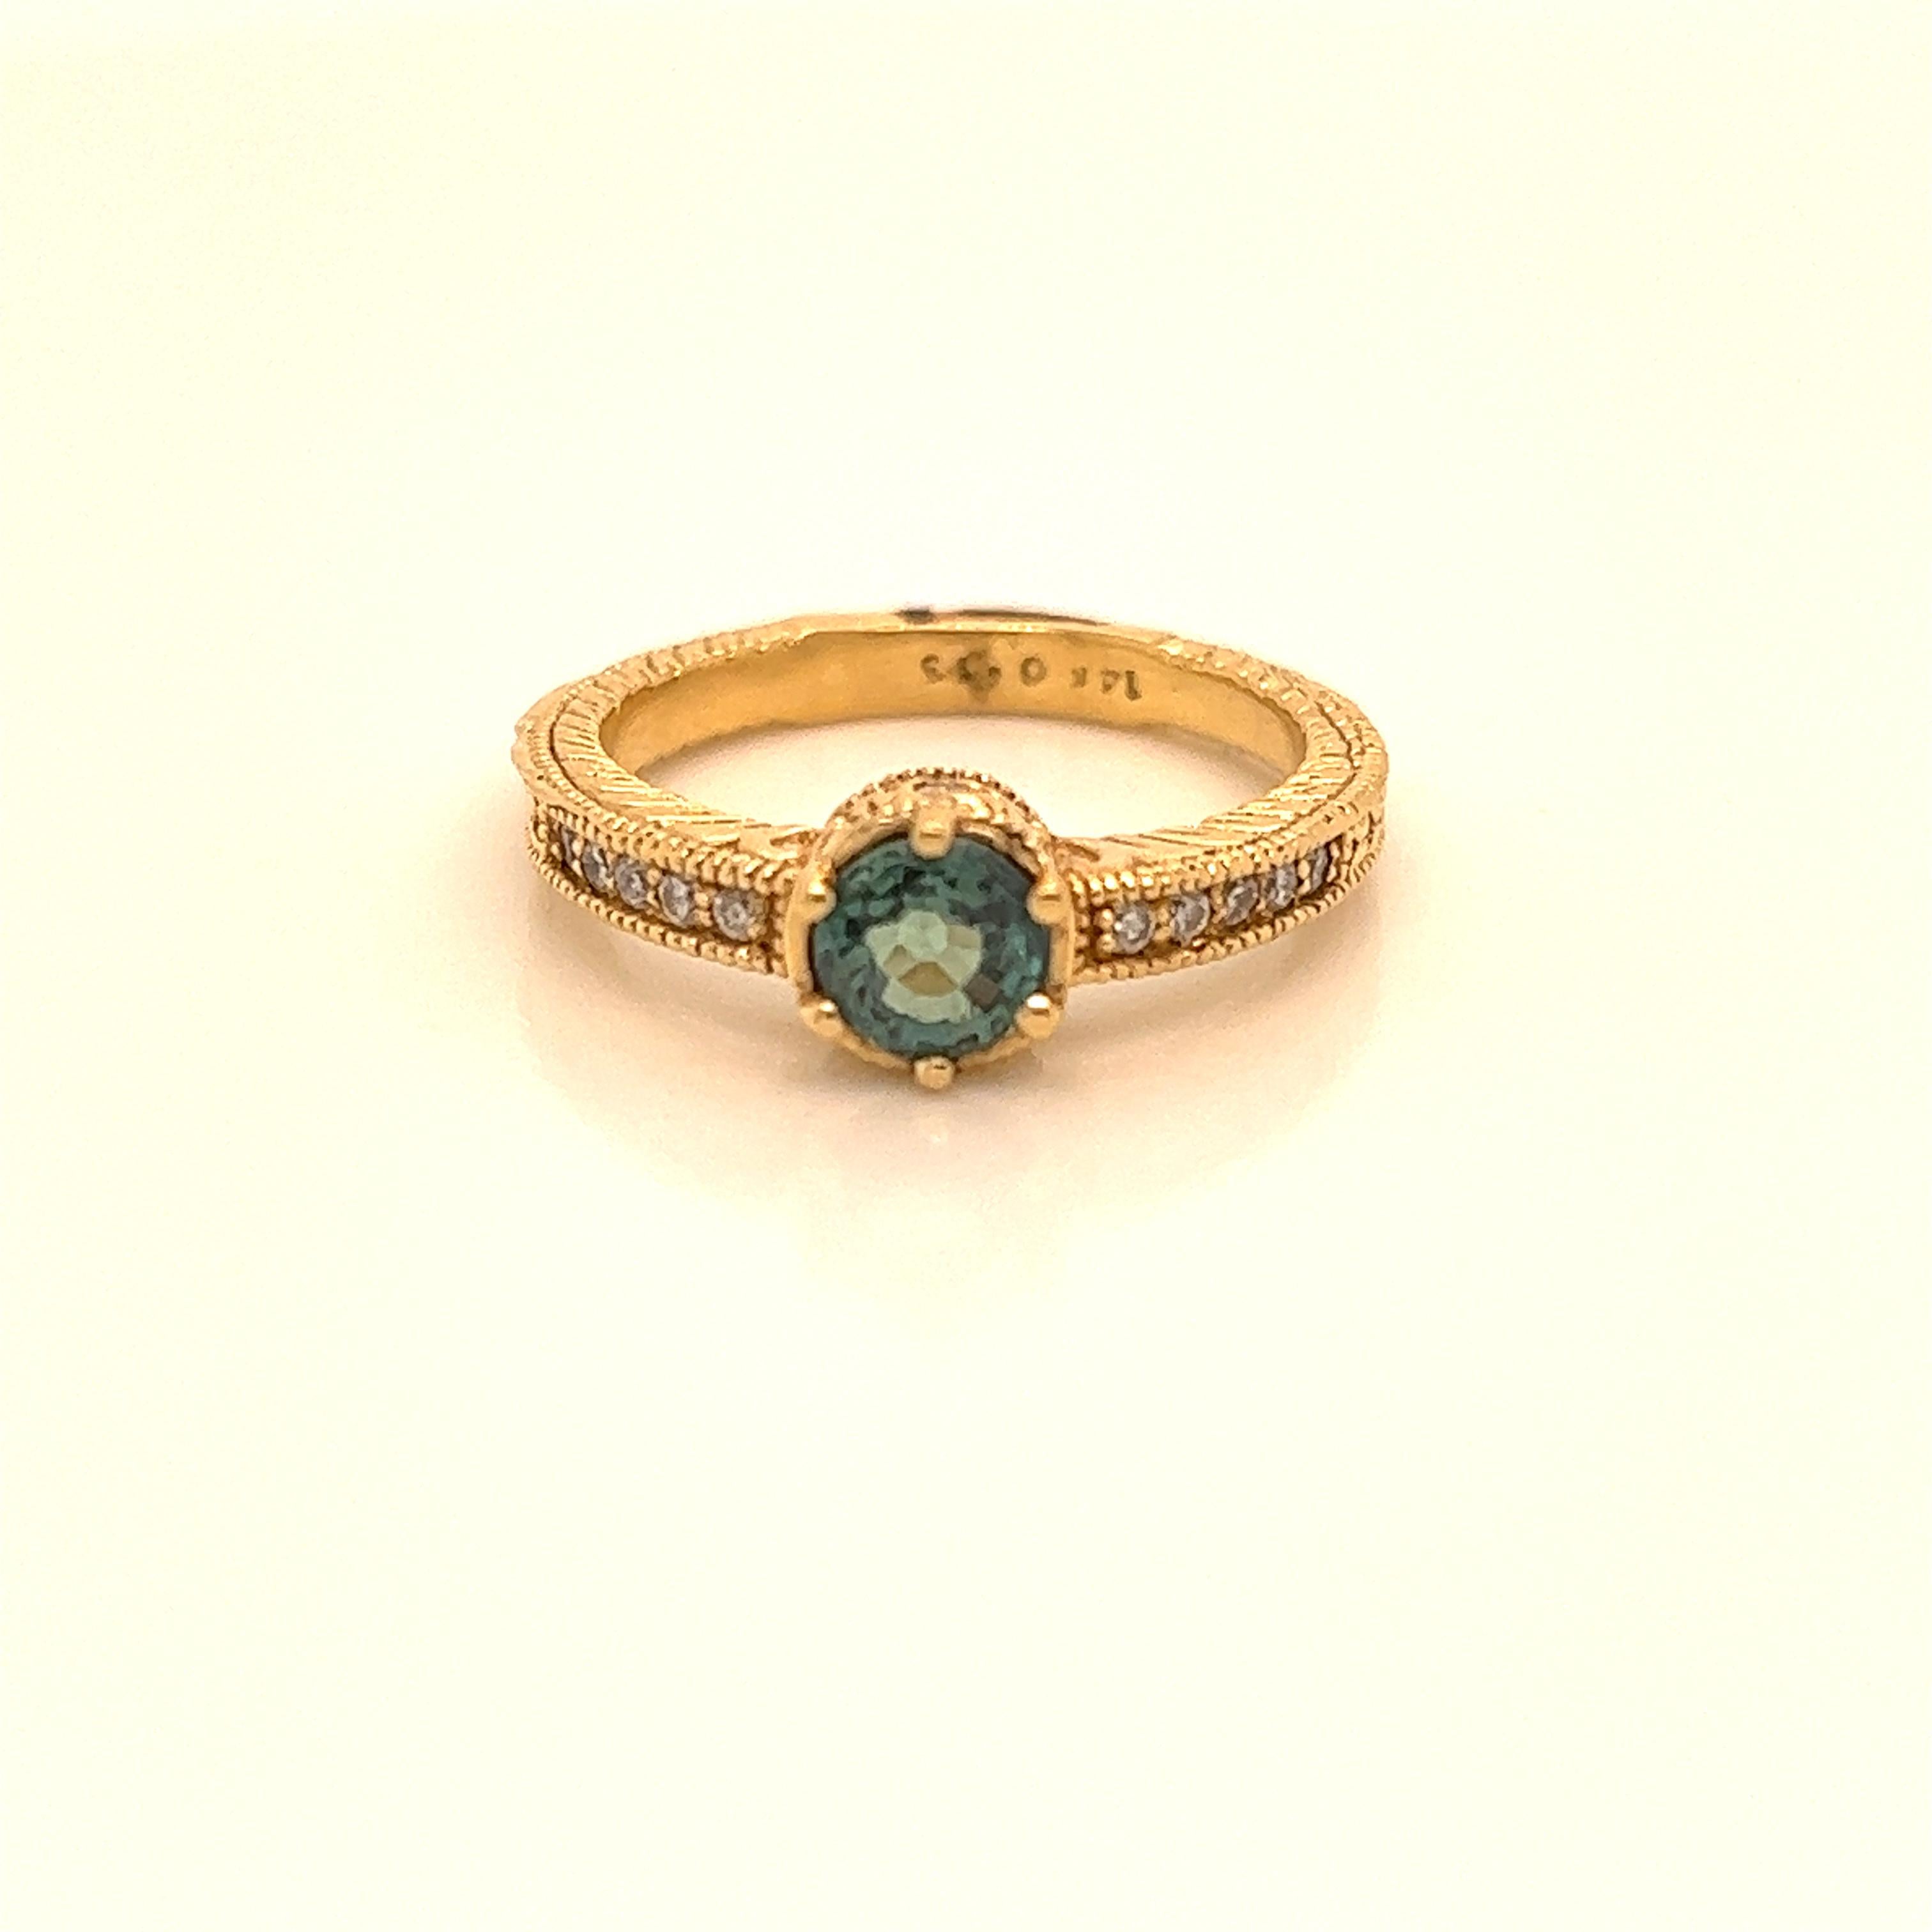 This is a gorgeous natural AAA quality Round Alexandrite surrounded by dainty  diamonds that is set in solid 14 Yellow Gold Ring. This ring features a natural 0.77carat round alexandrite that is certified by the Gemological Institute of America